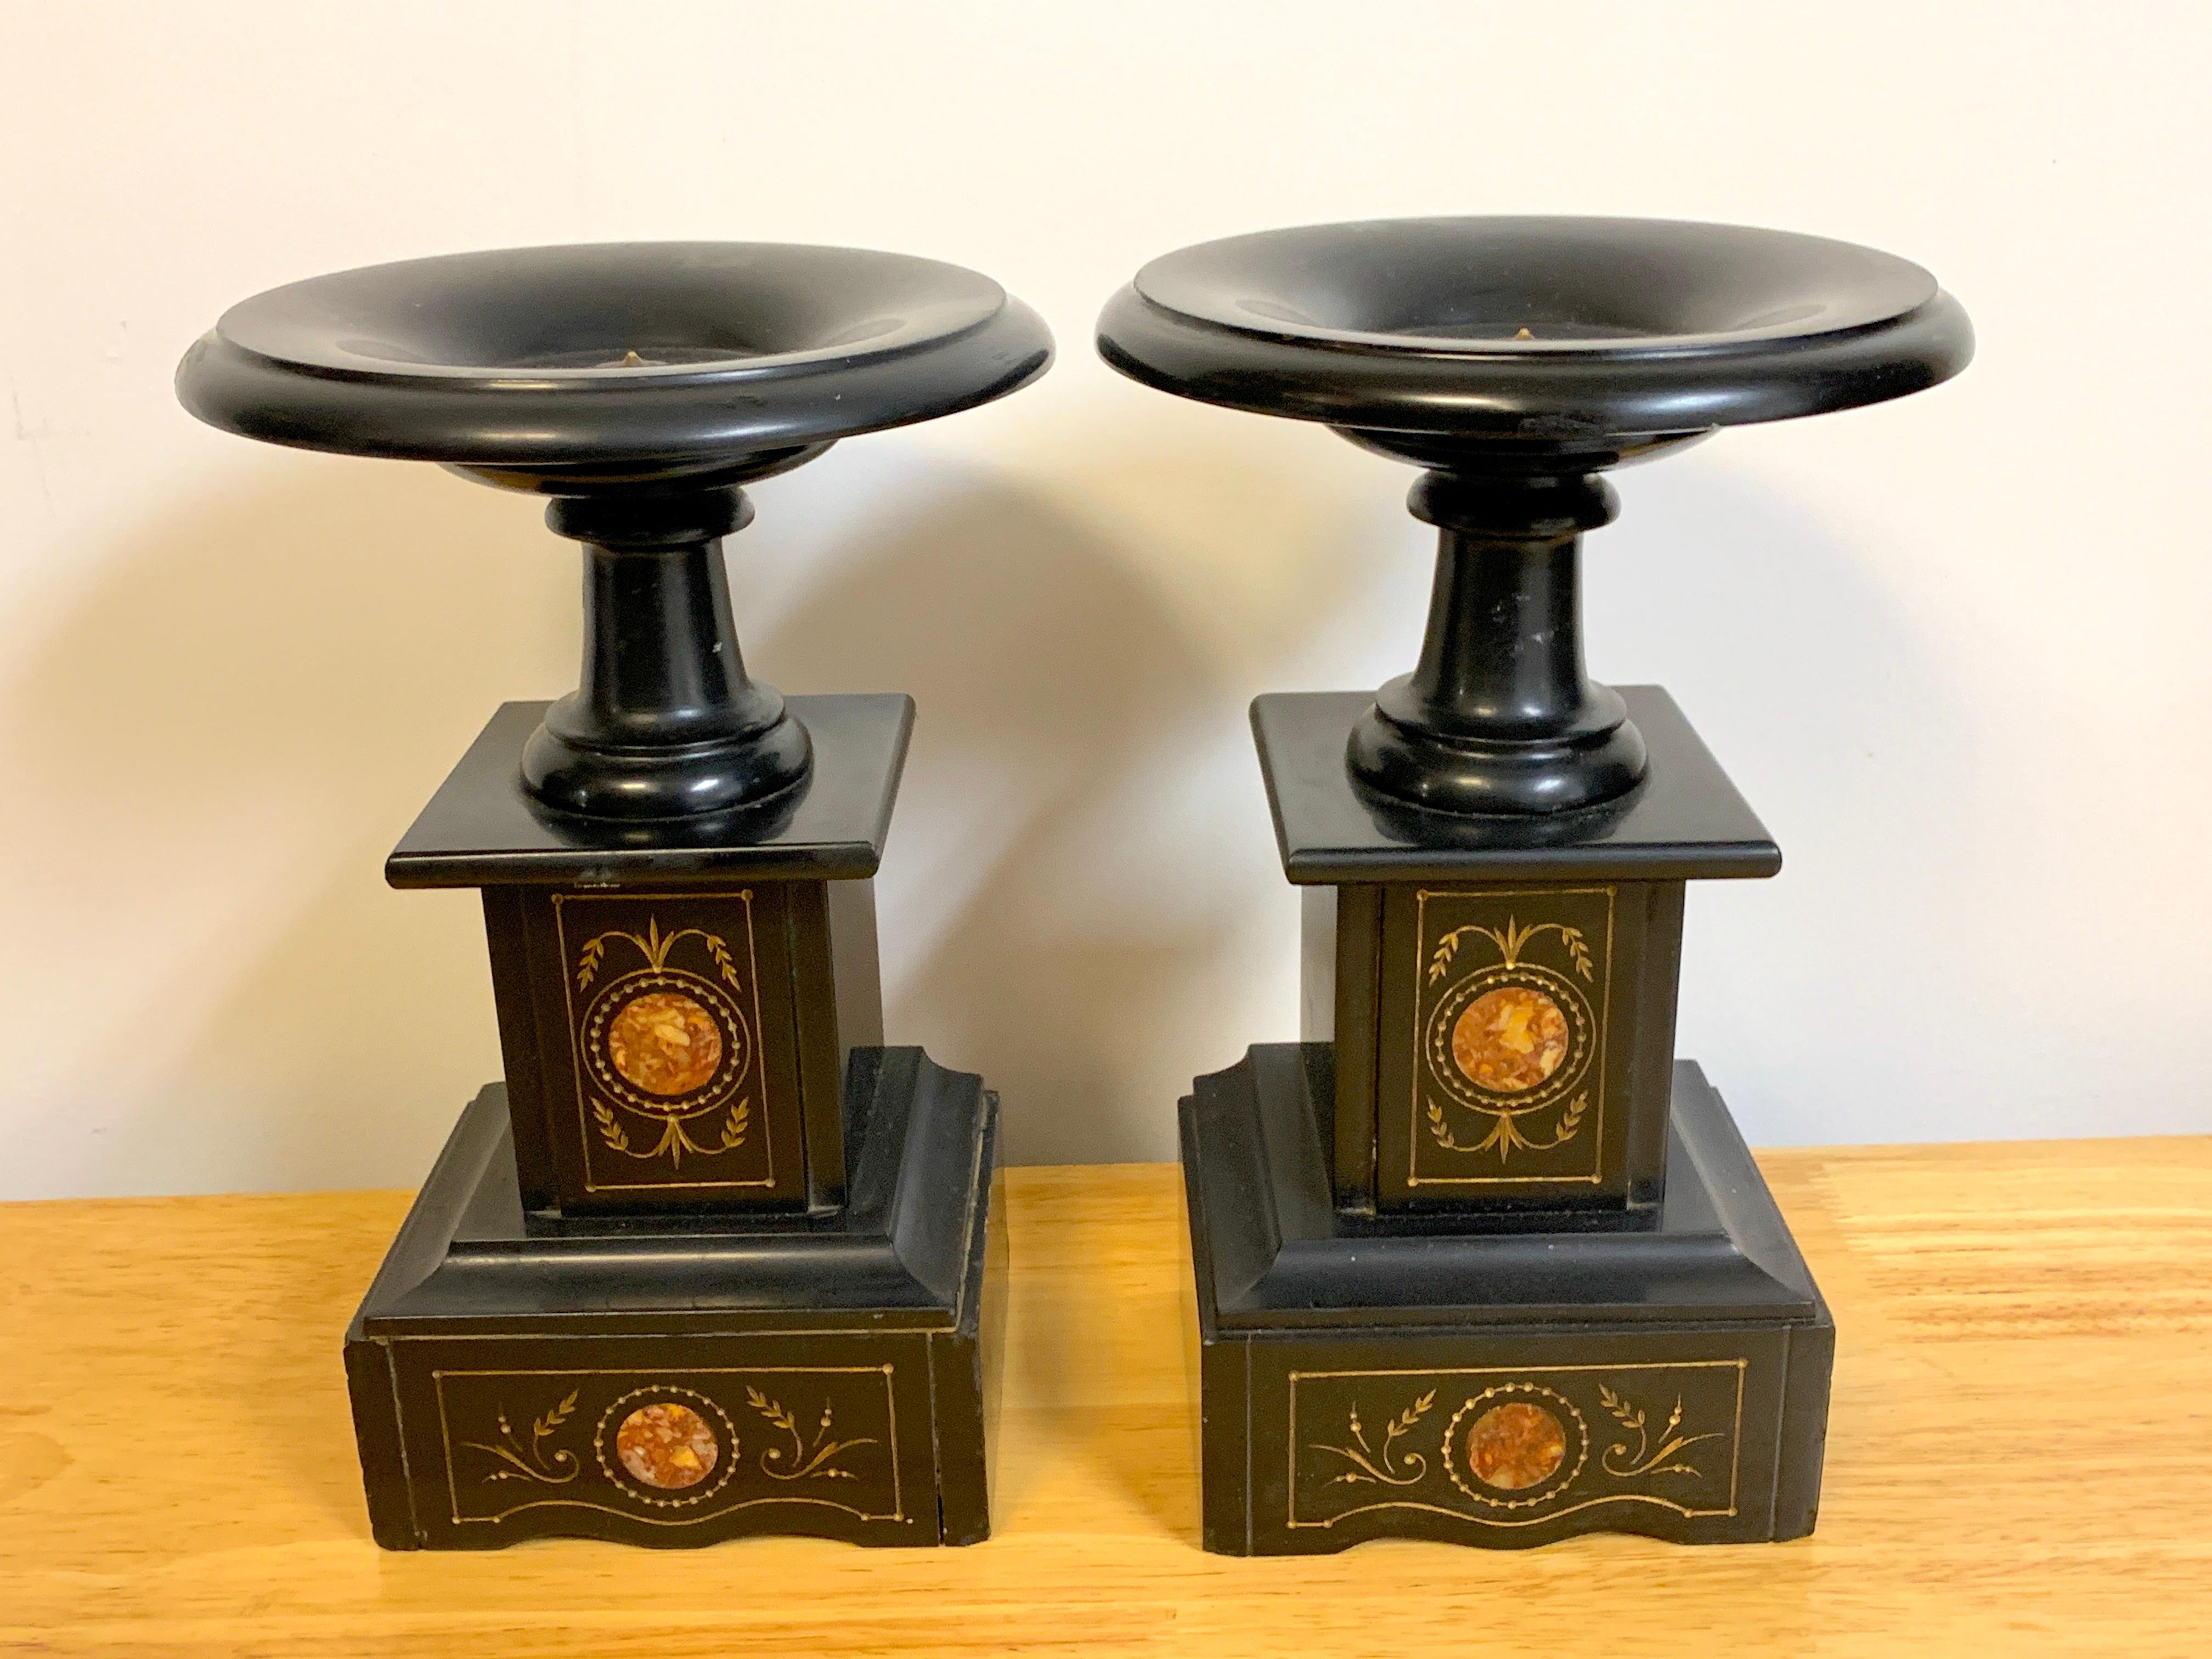 Pair of 19th Century Italian Grand Tour Inlaid Black Marble Tazza In Good Condition For Sale In West Palm Beach, FL